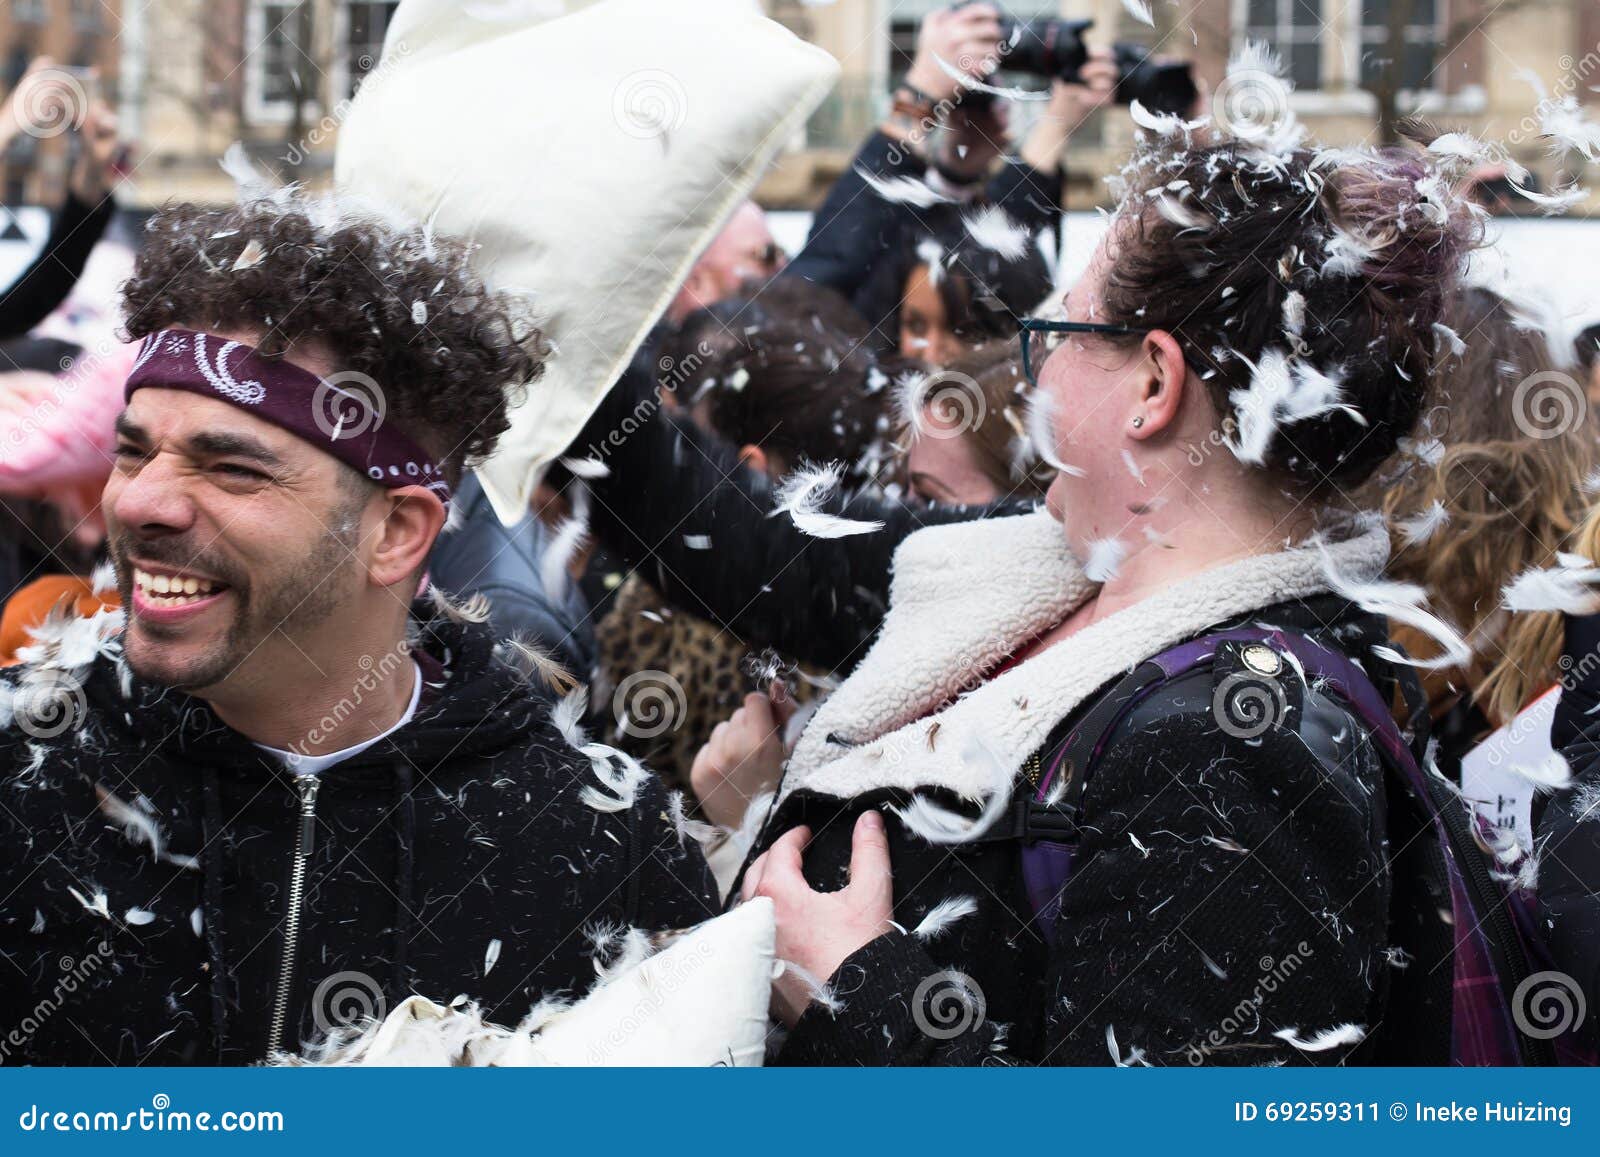 Pillow Fight Day 2016 Editorial Photo Image Of Pillowfight 69259311 